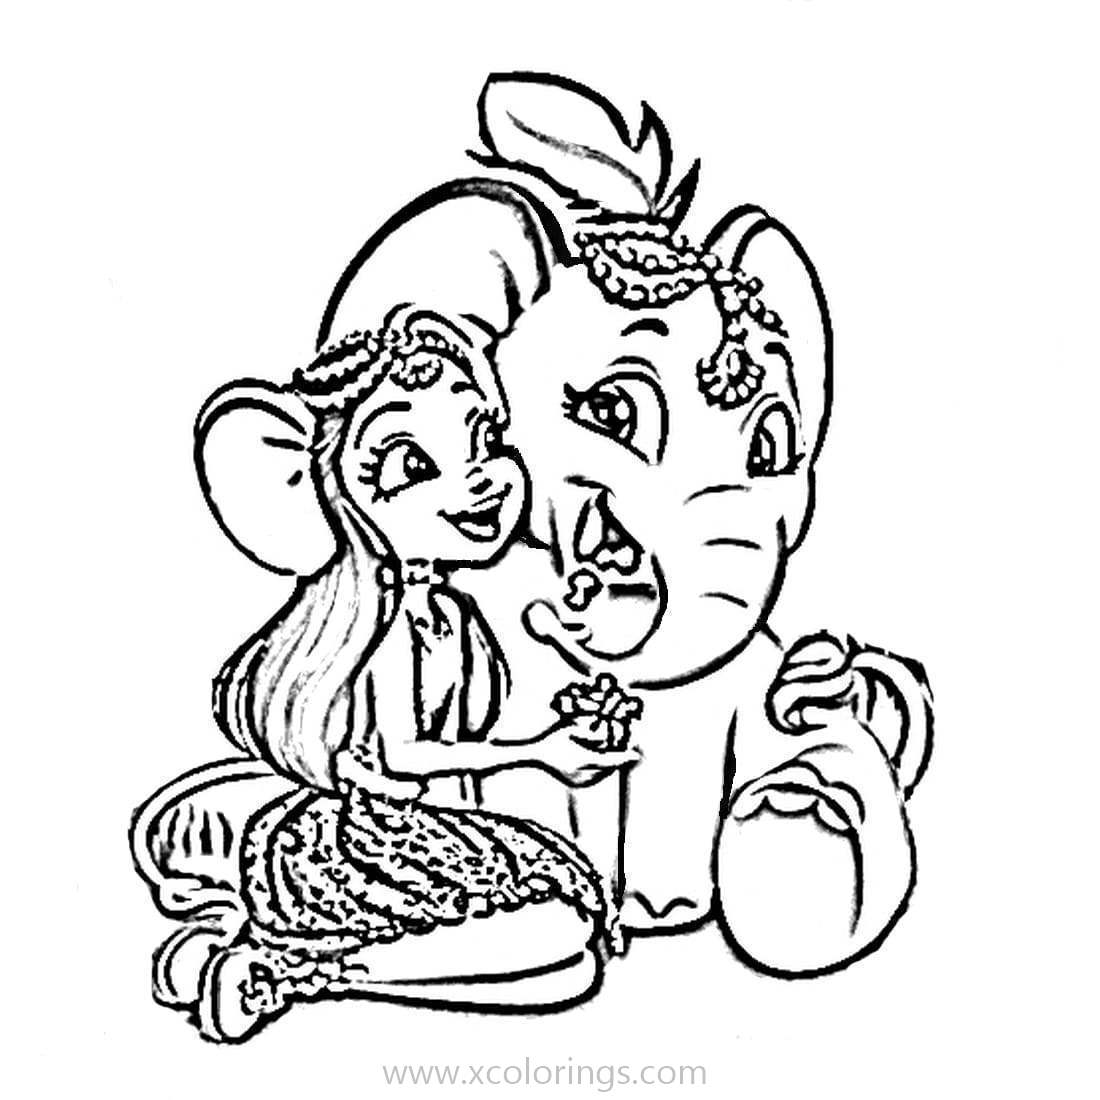 Free Enchantimals Coloring Pages Ekaterina Elephant and Antic printable